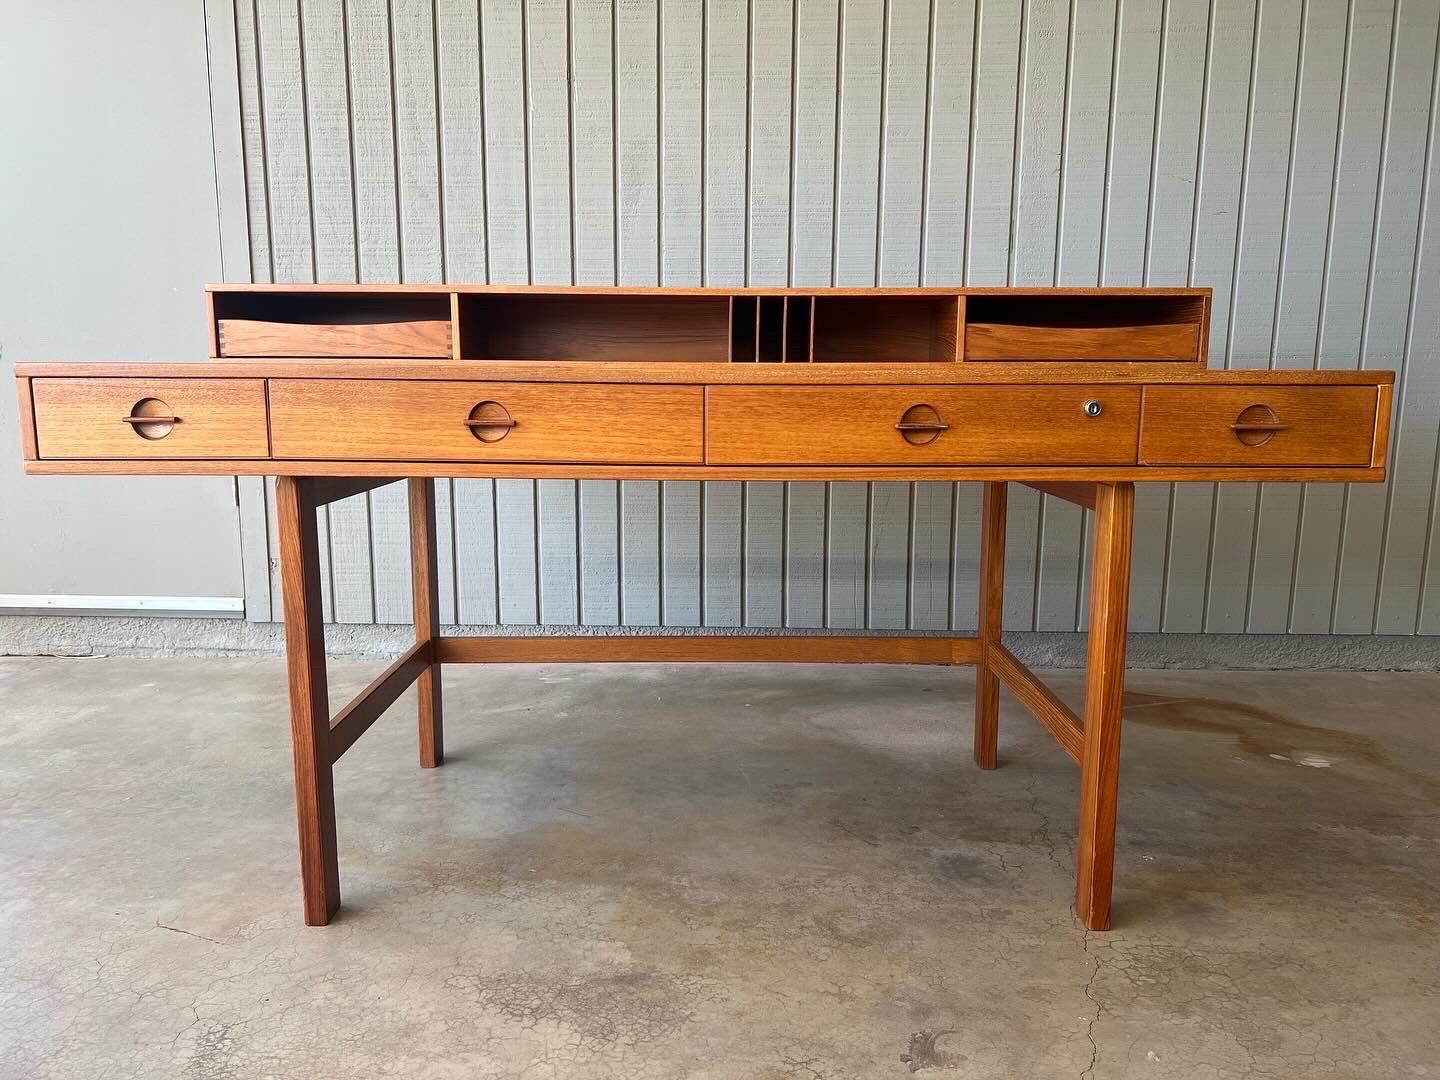 The iconic Løvig teak flip top desk designed by Peter Løvig Nielsen, 1960s, Denmark. It’s versatile in that the back shelf can flip down on its brass hinges to create a larger work surface. The bigger size of this desk is great for modern day work